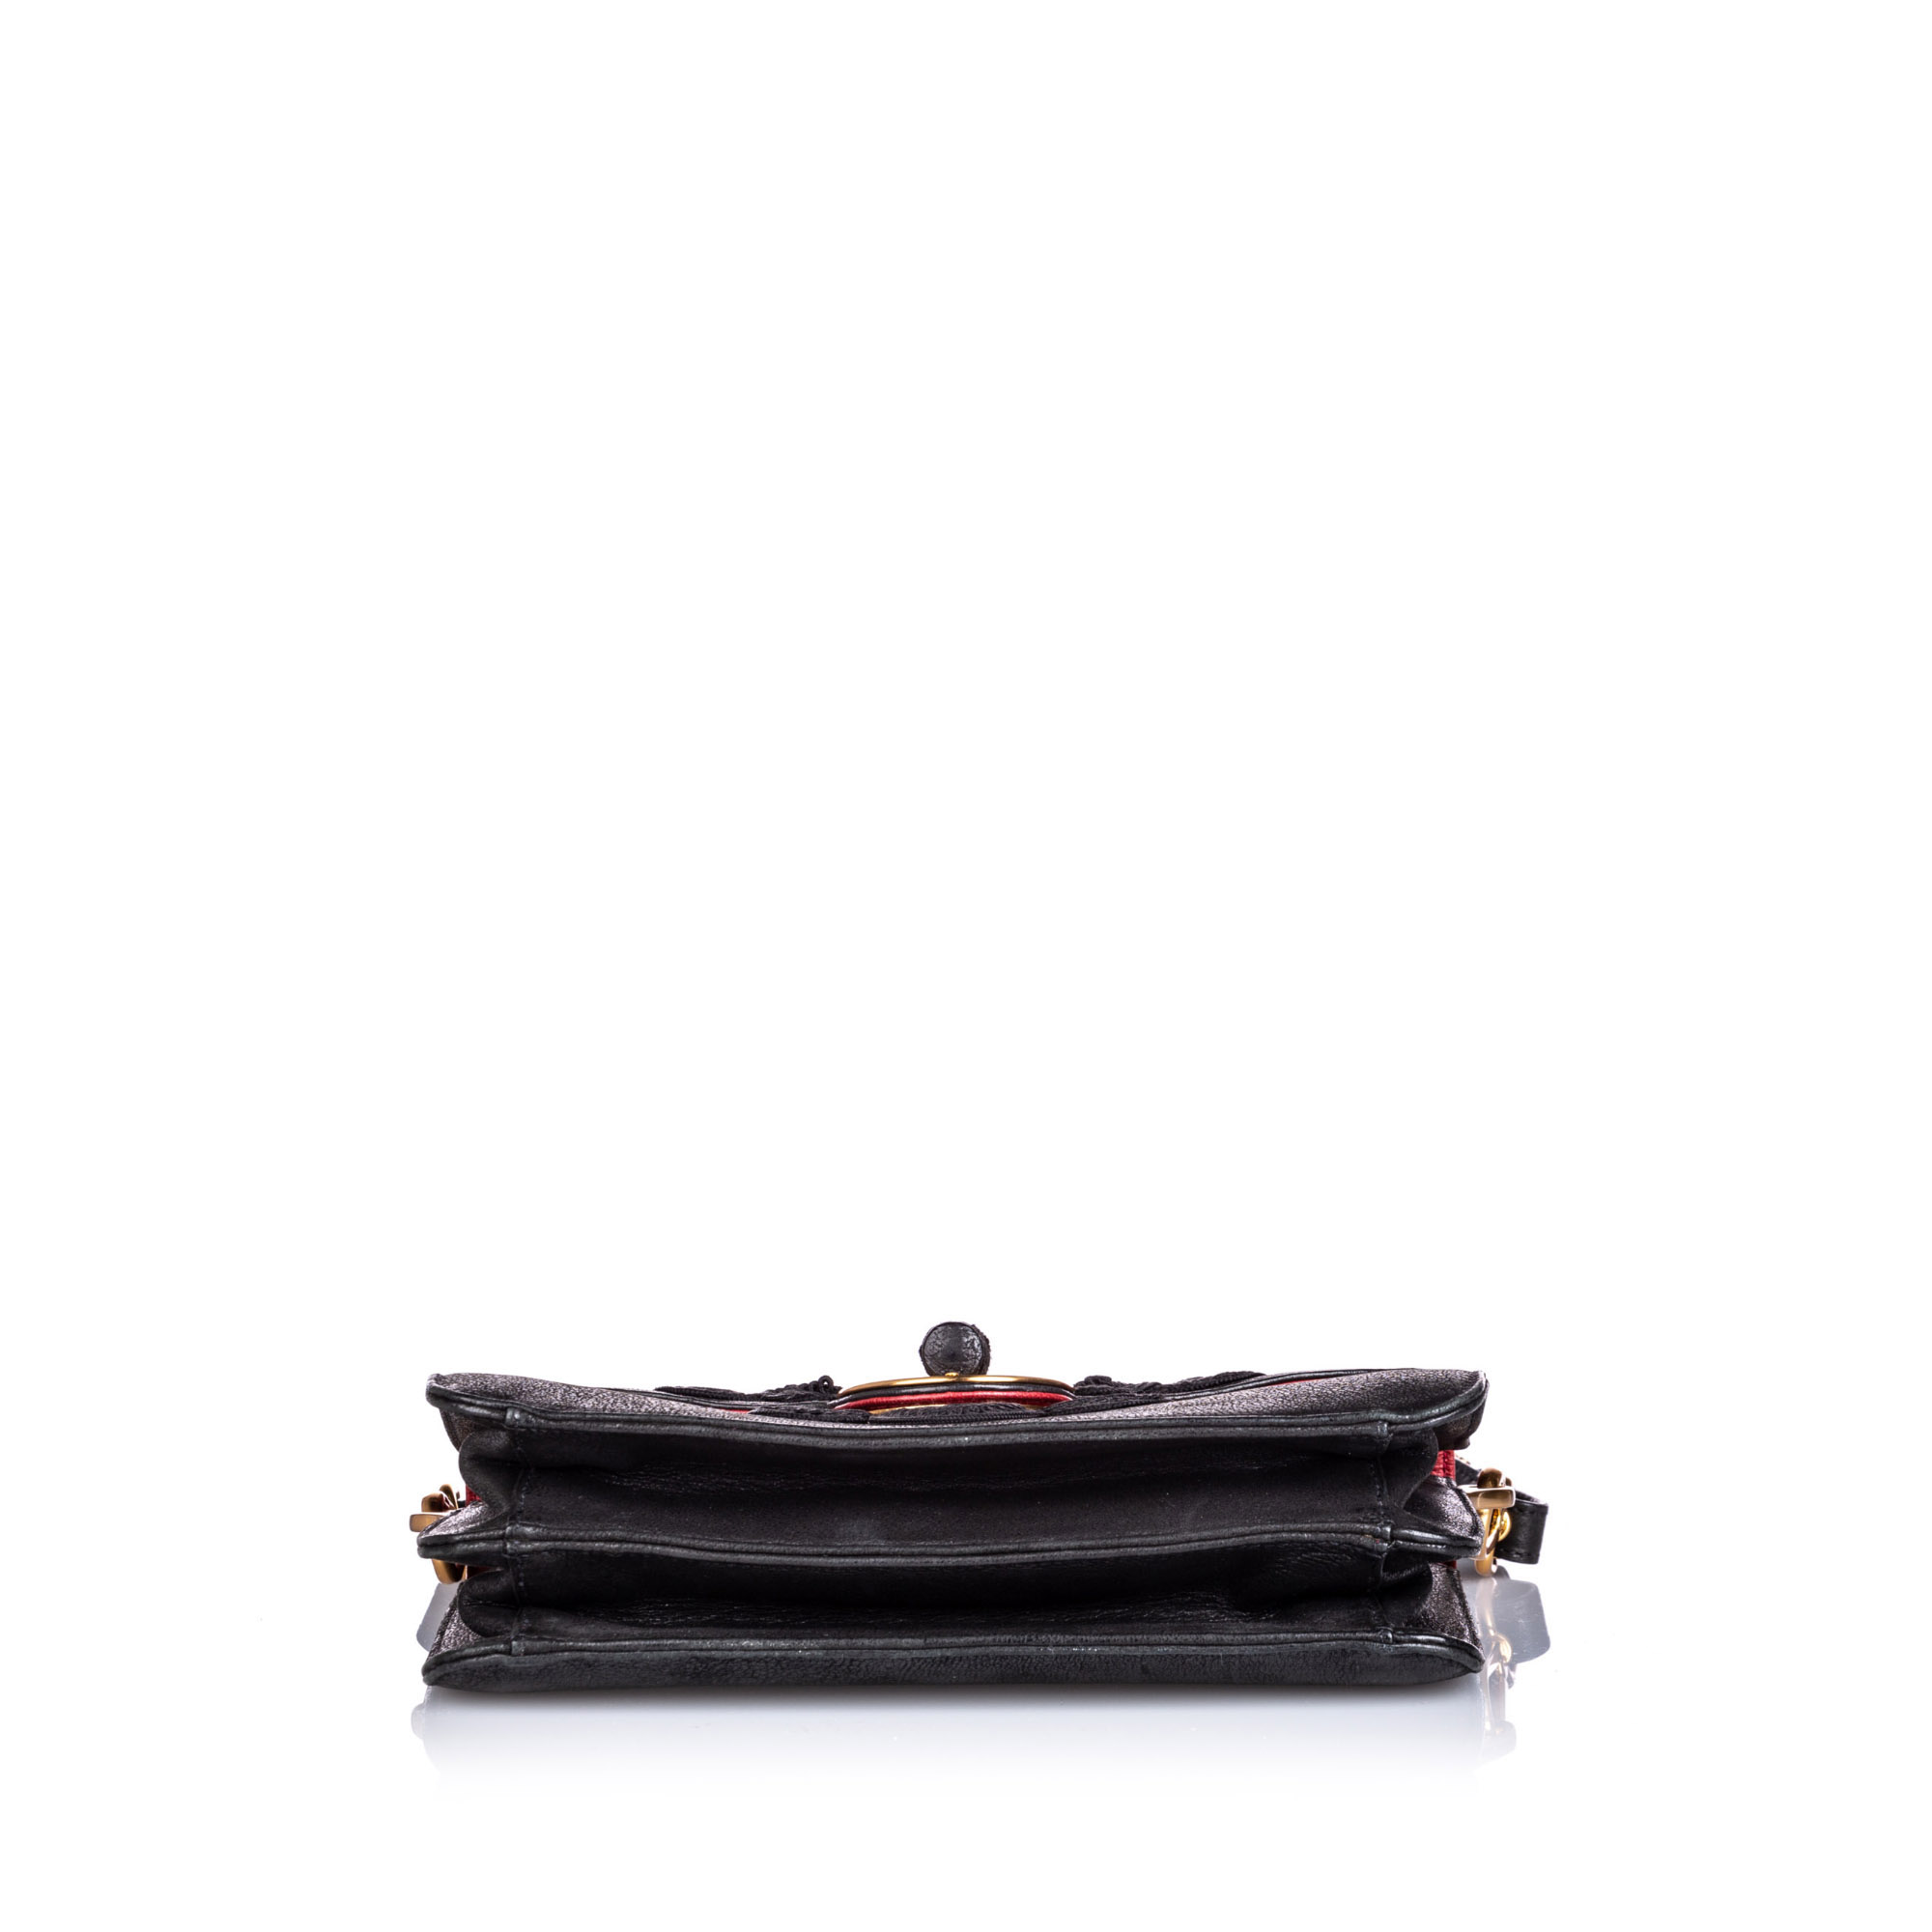 Prada Embroidered Leather Shoulder Bag, this shoulder bag features a leather body with embroidered - Image 4 of 11